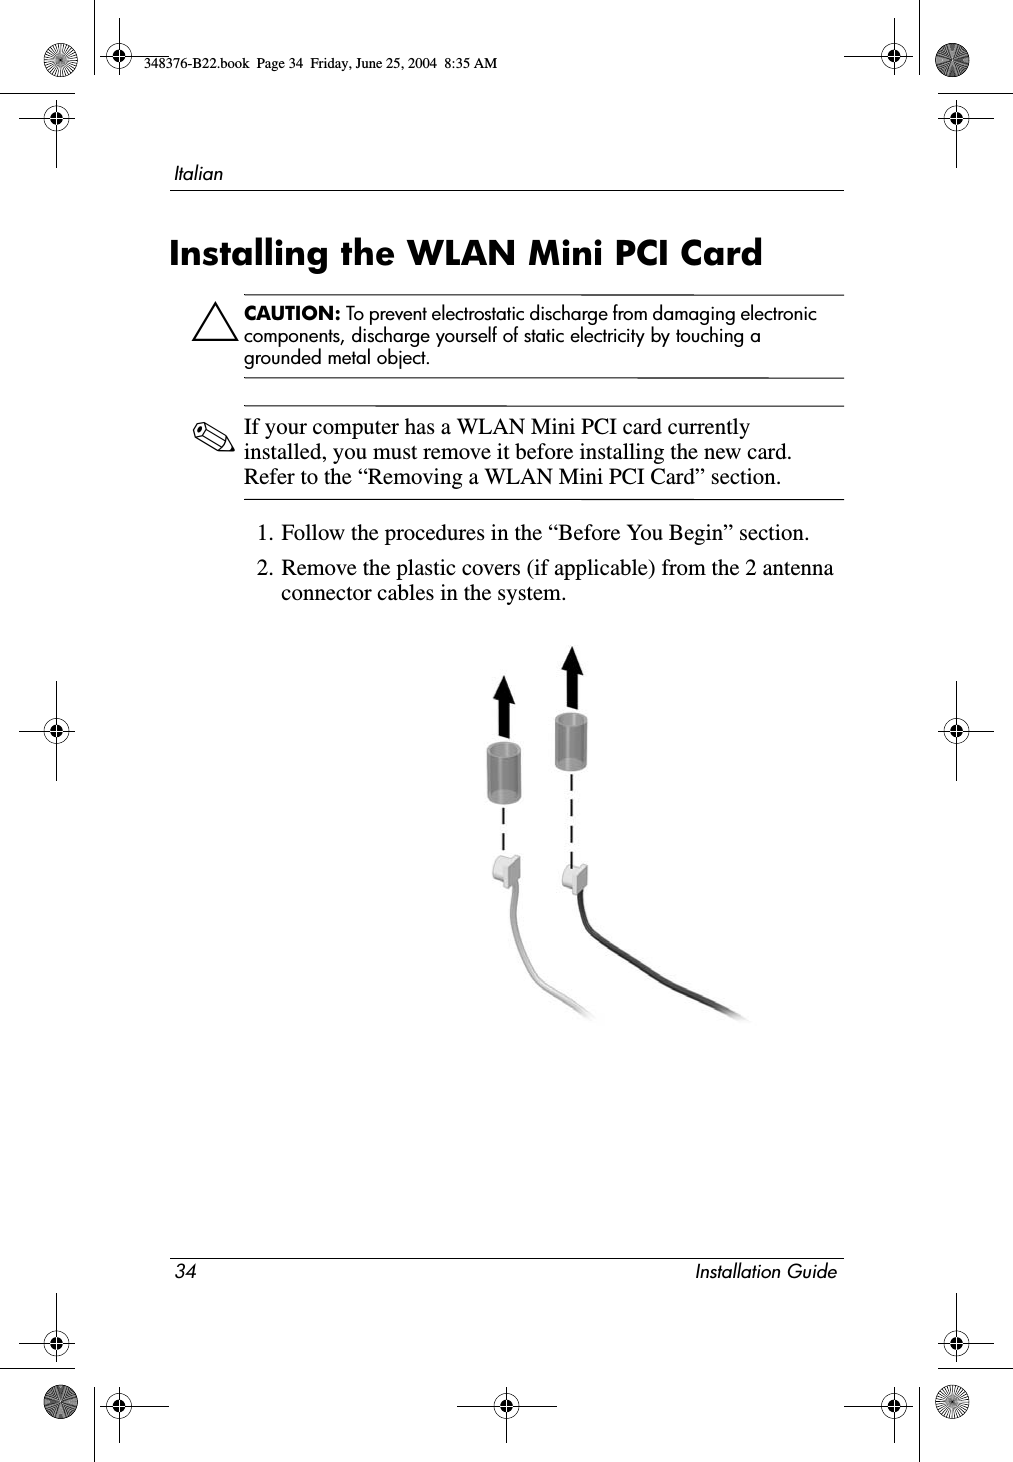 34 Installation GuideItalianInstalling the WLAN Mini PCI CardÄCAUTION: To prevent electrostatic discharge from damaging electronic components, discharge yourself of static electricity by touching a grounded metal object.✎If your computer has a WLAN Mini PCI card currently installed, you must remove it before installing the new card. Refer to the “Removing a WLAN Mini PCI Card” section.1. Follow the procedures in the “Before You Begin” section.2. Remove the plastic covers (if applicable) from the 2 antenna connector cables in the system.348376-B22.book  Page 34  Friday, June 25, 2004  8:35 AM